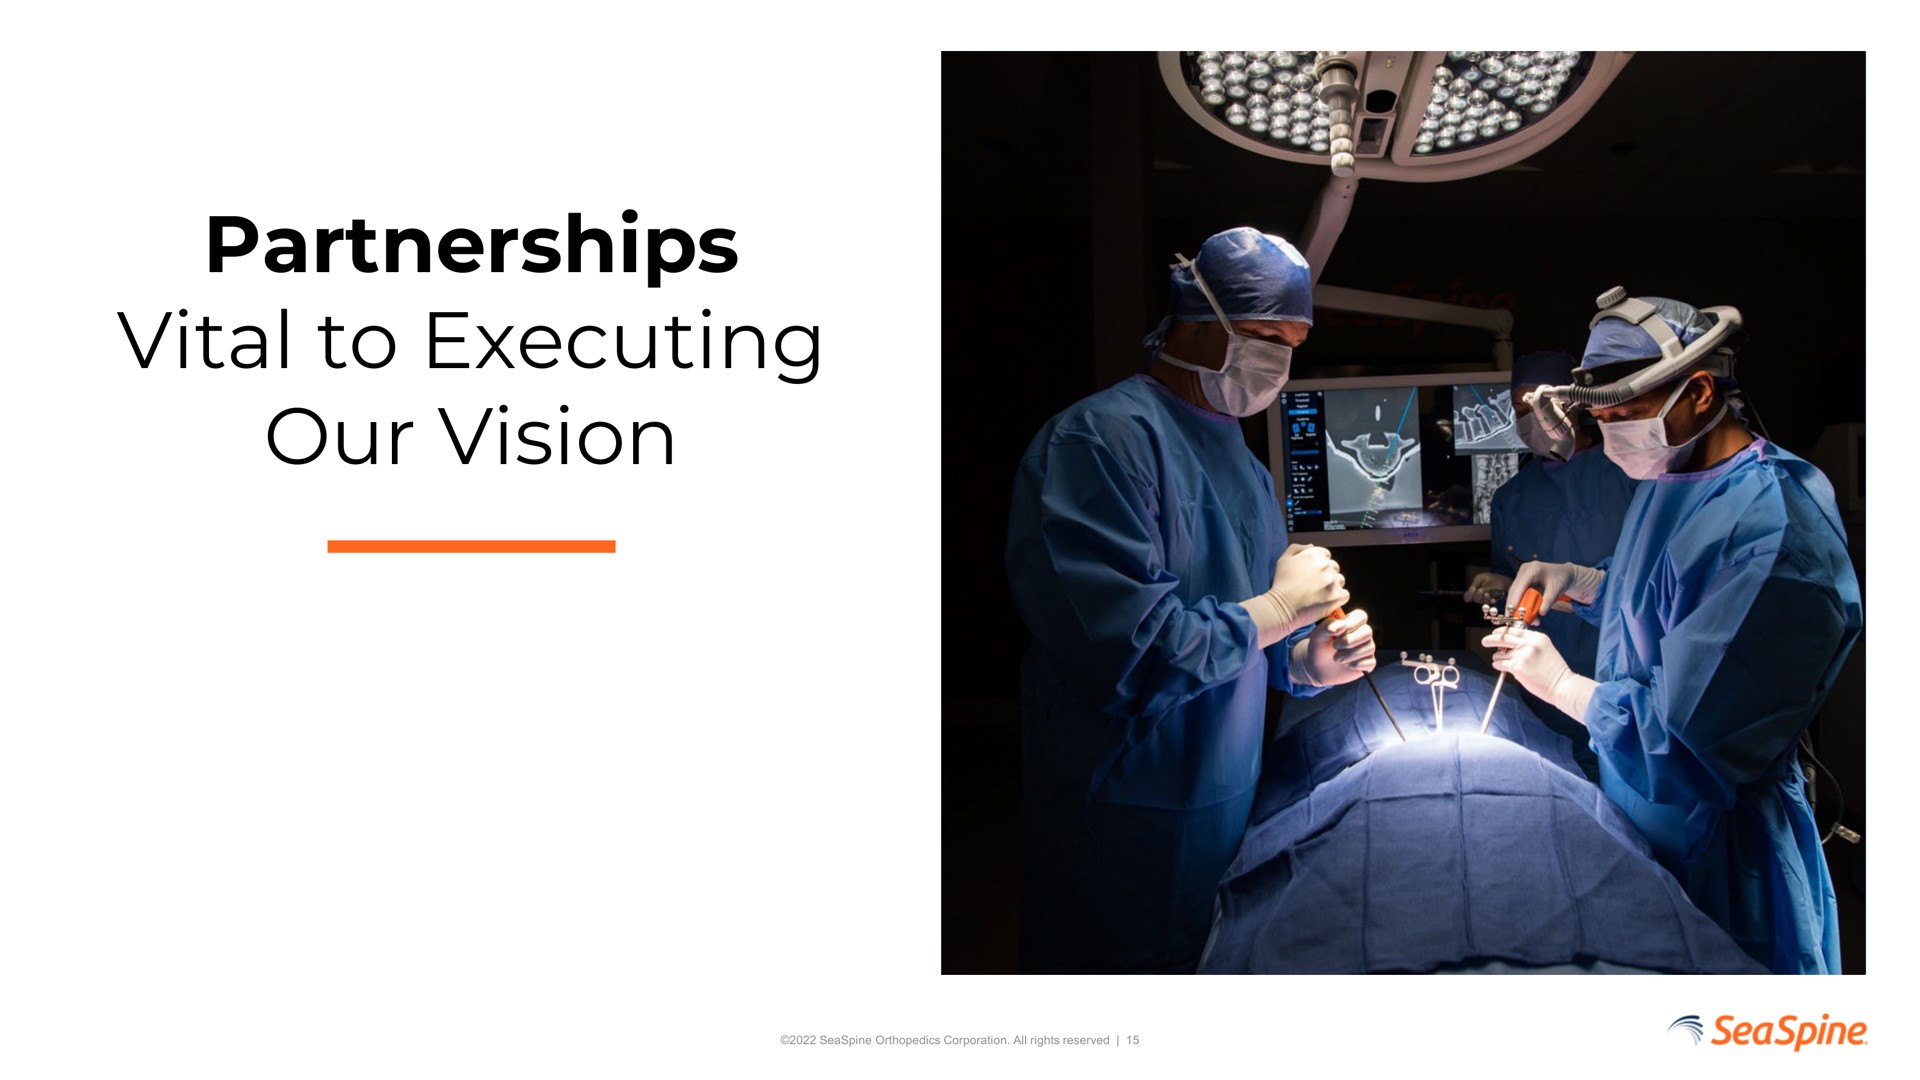 partnerships vital to executing our vision | SeaSpine